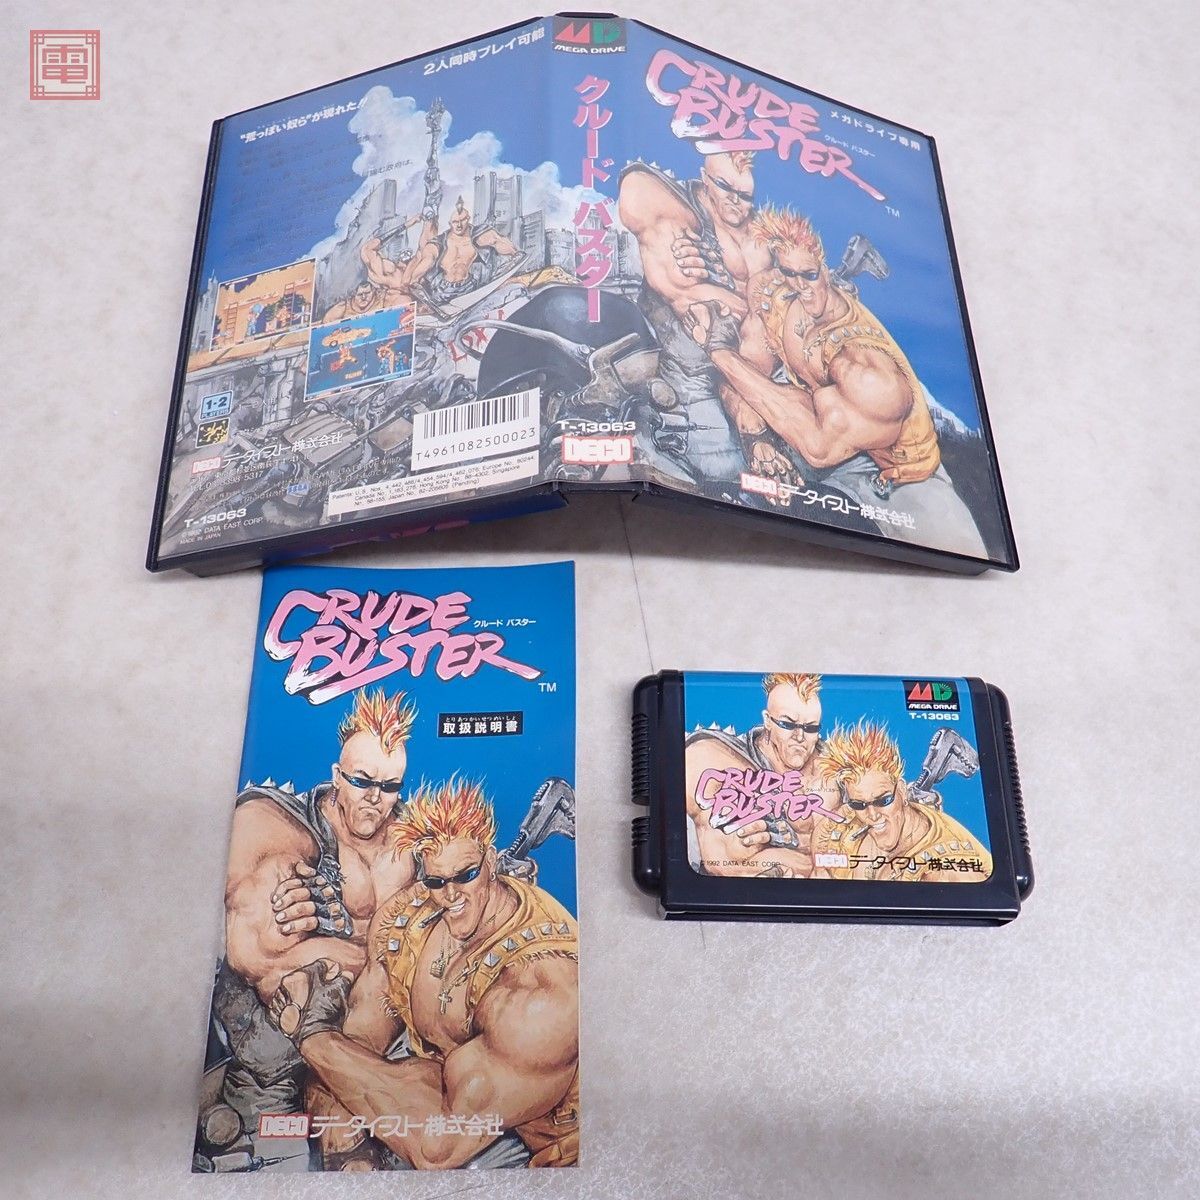  operation guarantee goods MD Mega Drive Crew do Buster CRUDE BUSTER data East DATA EAST box opinion attaching [10